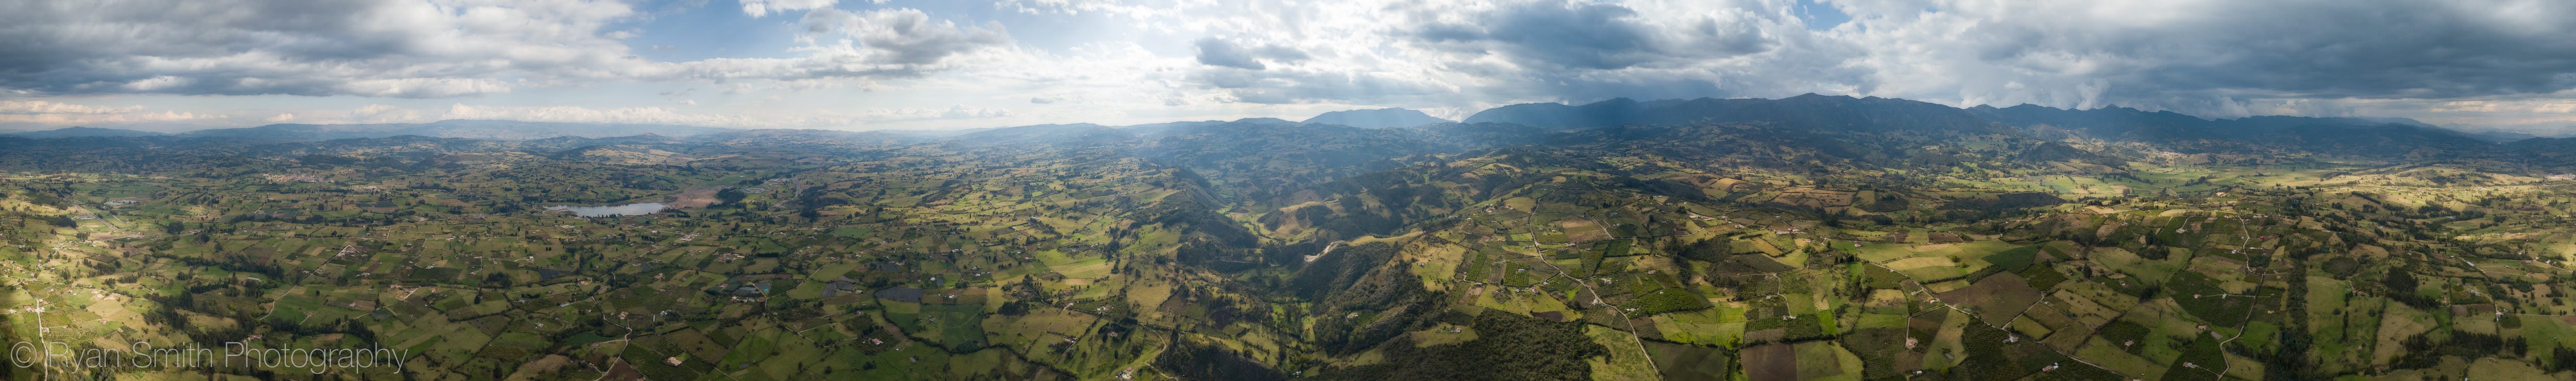 Drone panorama of the mountain farmlands in Colombia